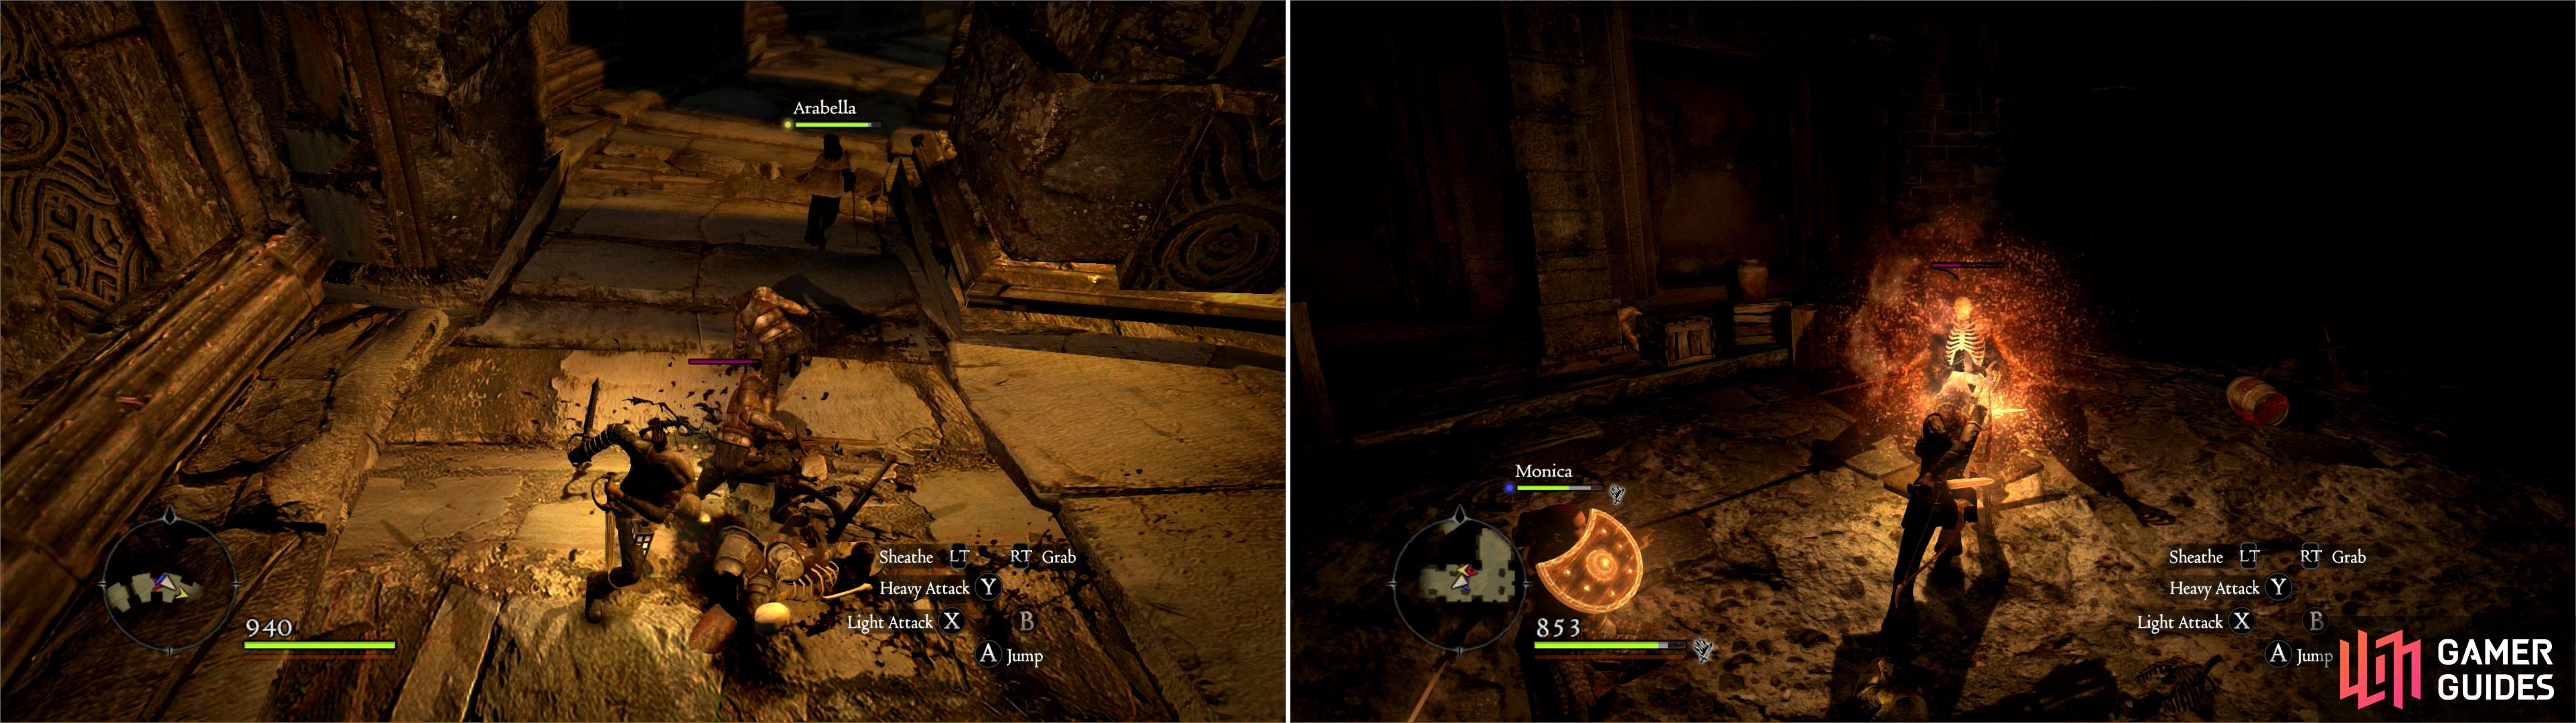 Undead Warriors will by playing possum on the spiraling ramp leading to the depths of the Everfall (left). More undead - in the form of Skeletons - also lurk in the Everfall (right).